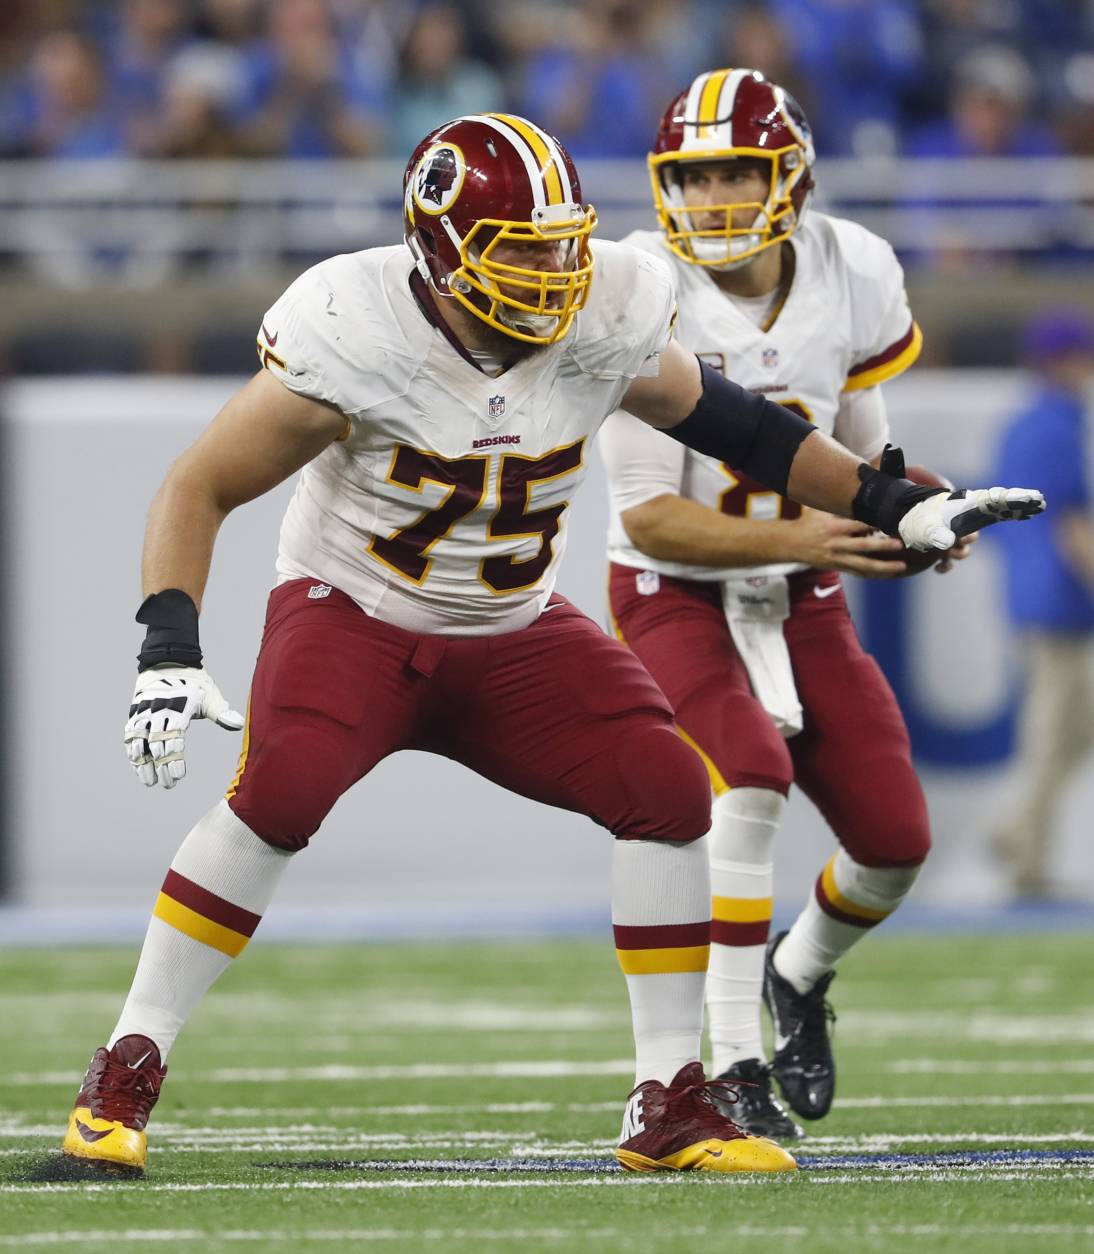 Washington Redskins offensive guard Brandon Scherff (75) protects quarterback Kirk Cousins during the second half of an NFL football game against the Detroit Lions, Sunday, Oct. 23, 2016 in Detroit. (AP Photo/Paul Sancya)